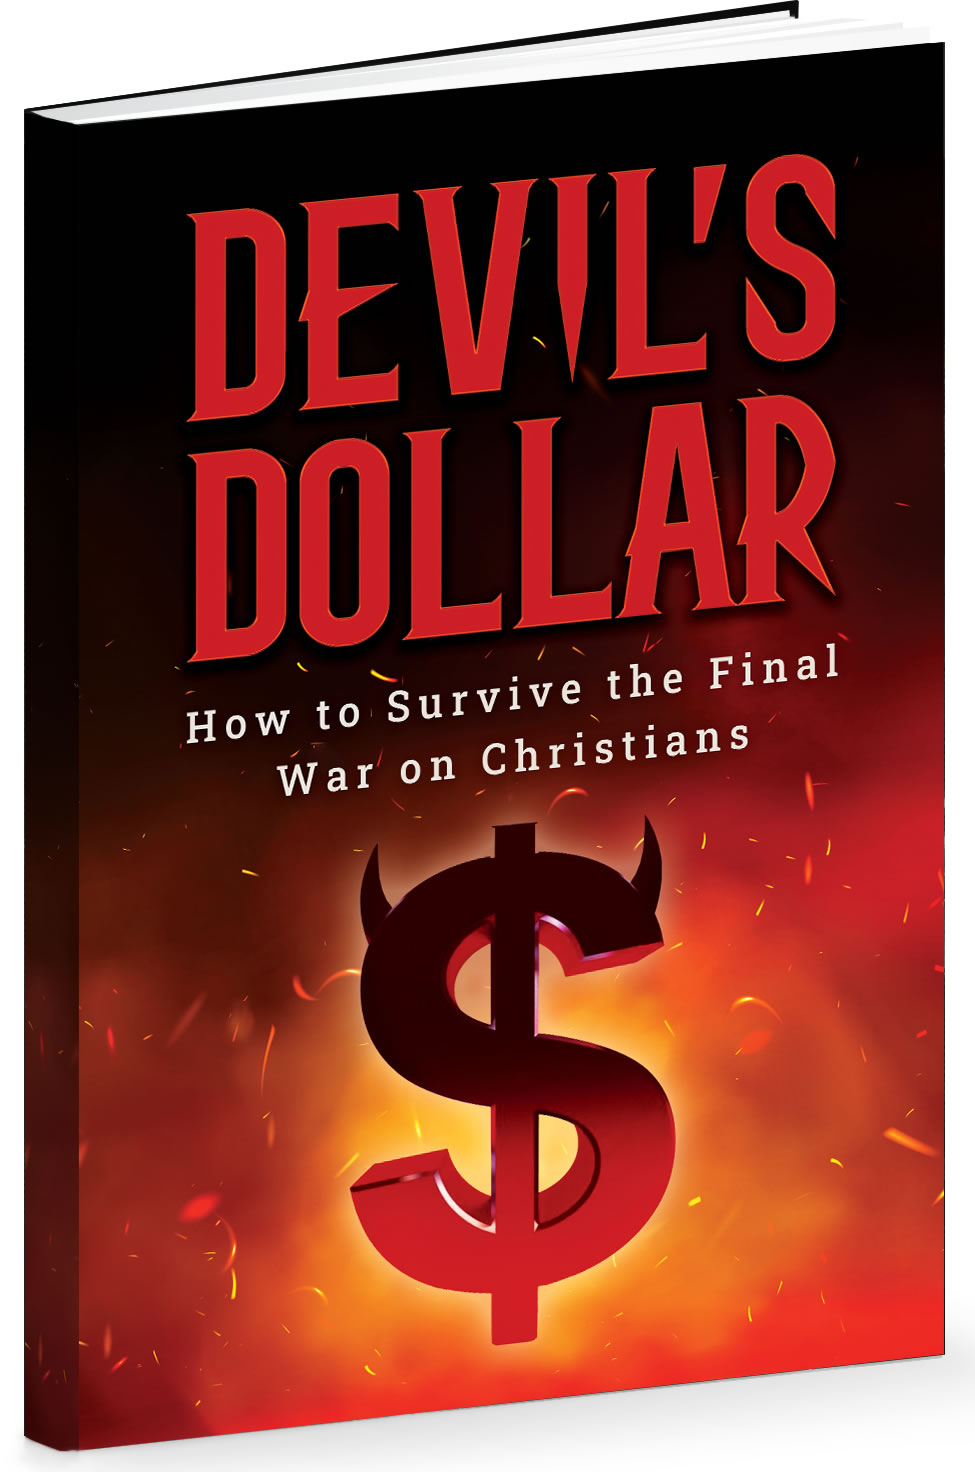 Review: Teddy Daniels’ Devil’s Dollar: How to Survive the Final War on Christians